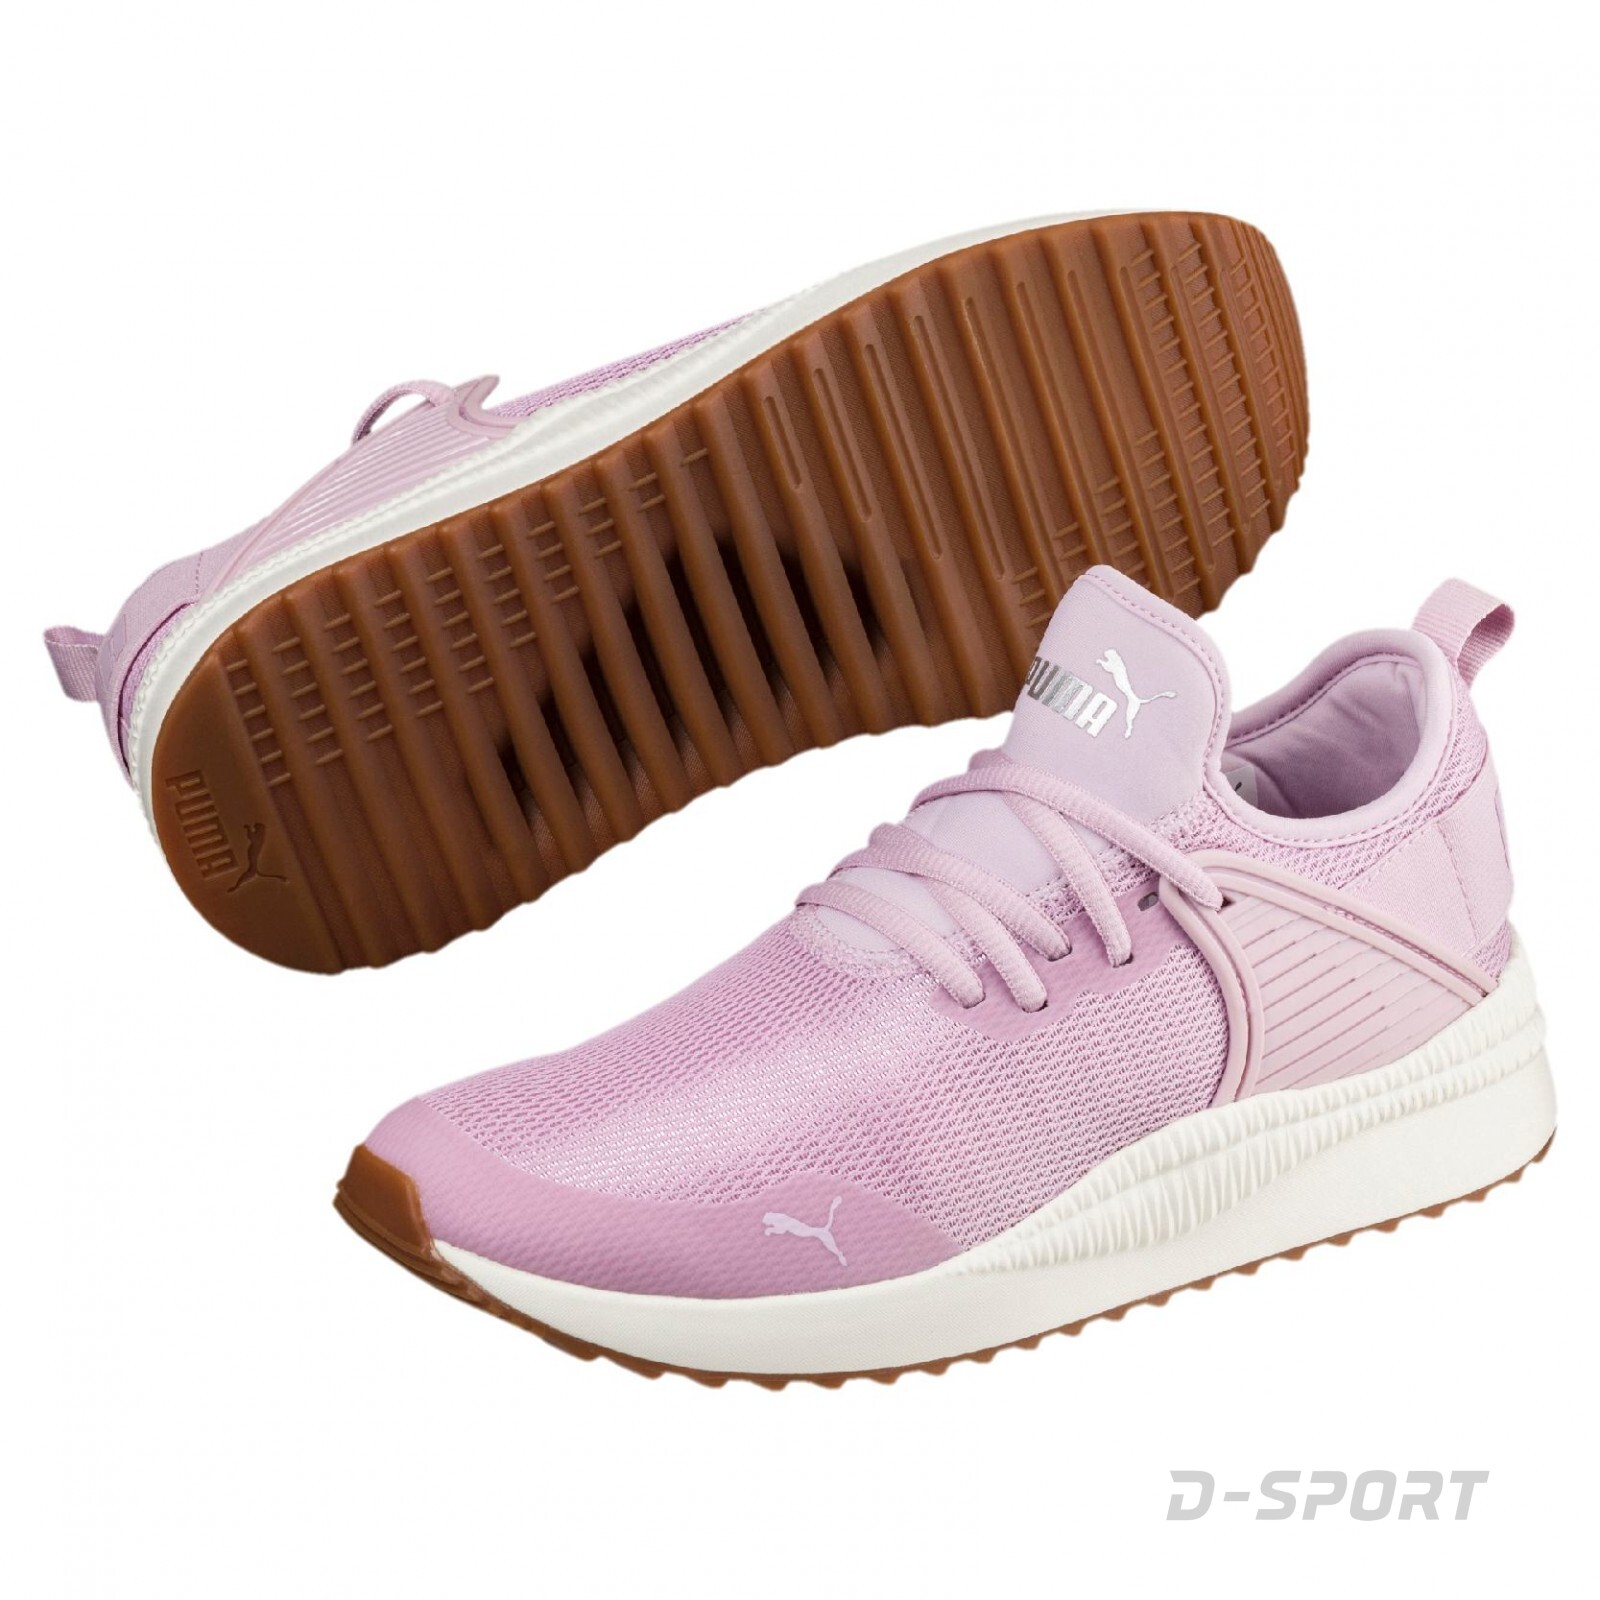 Puma Pacer Next Cage Winsome Orchid